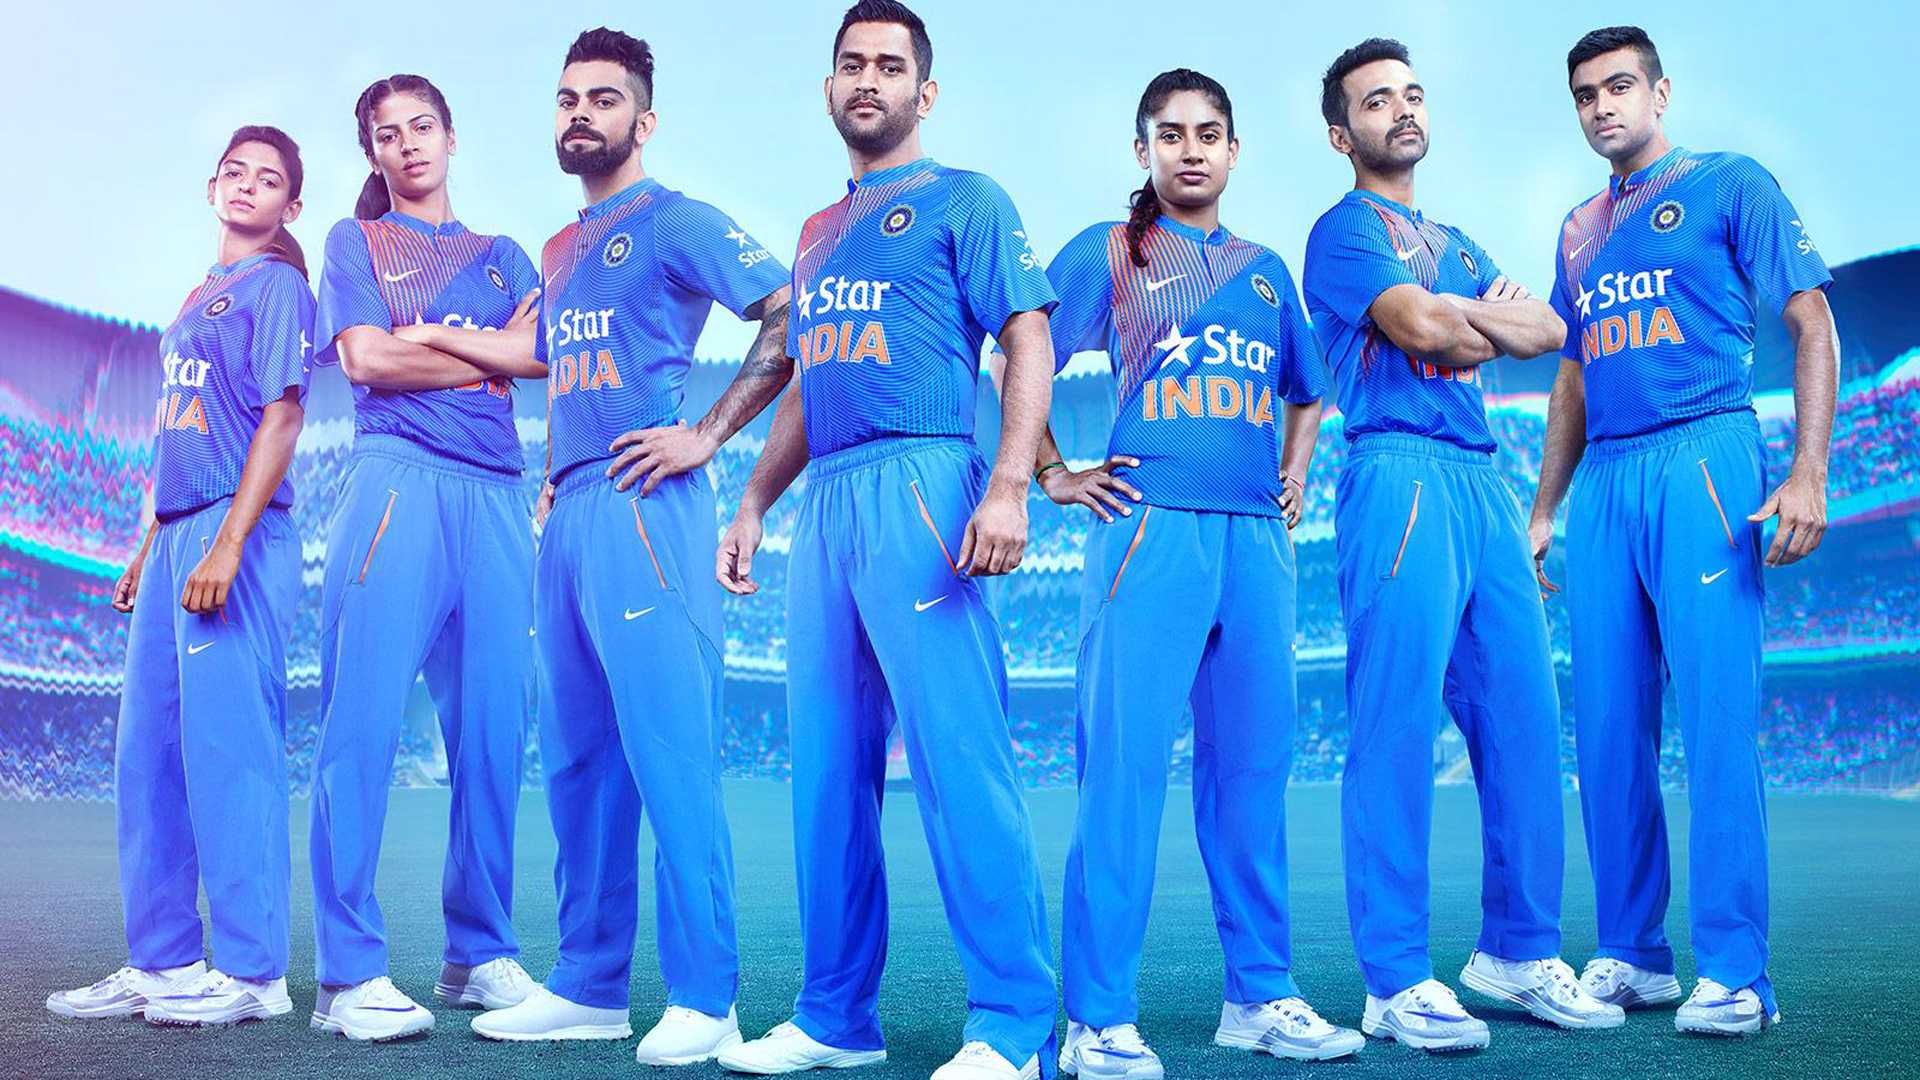 A first look at Nike's cricket jersey for the ICC T20 World Cup